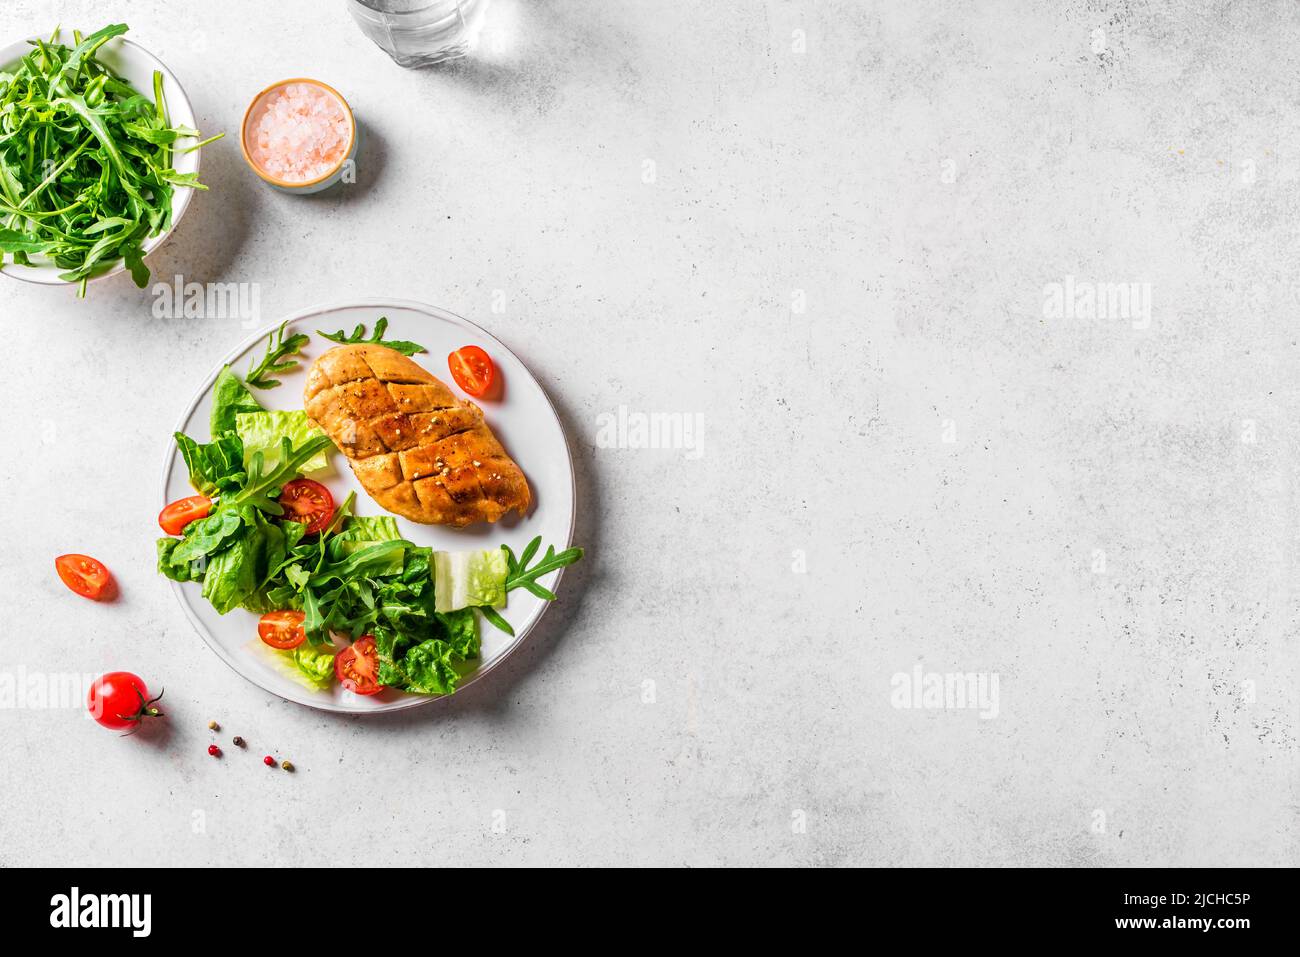 Grilled Chicken Salad with fresh vegetables and greens on white table. Roasted Chicken Breast, green lettuce, arugula, tomatoes salad for healthy lunc Stock Photo